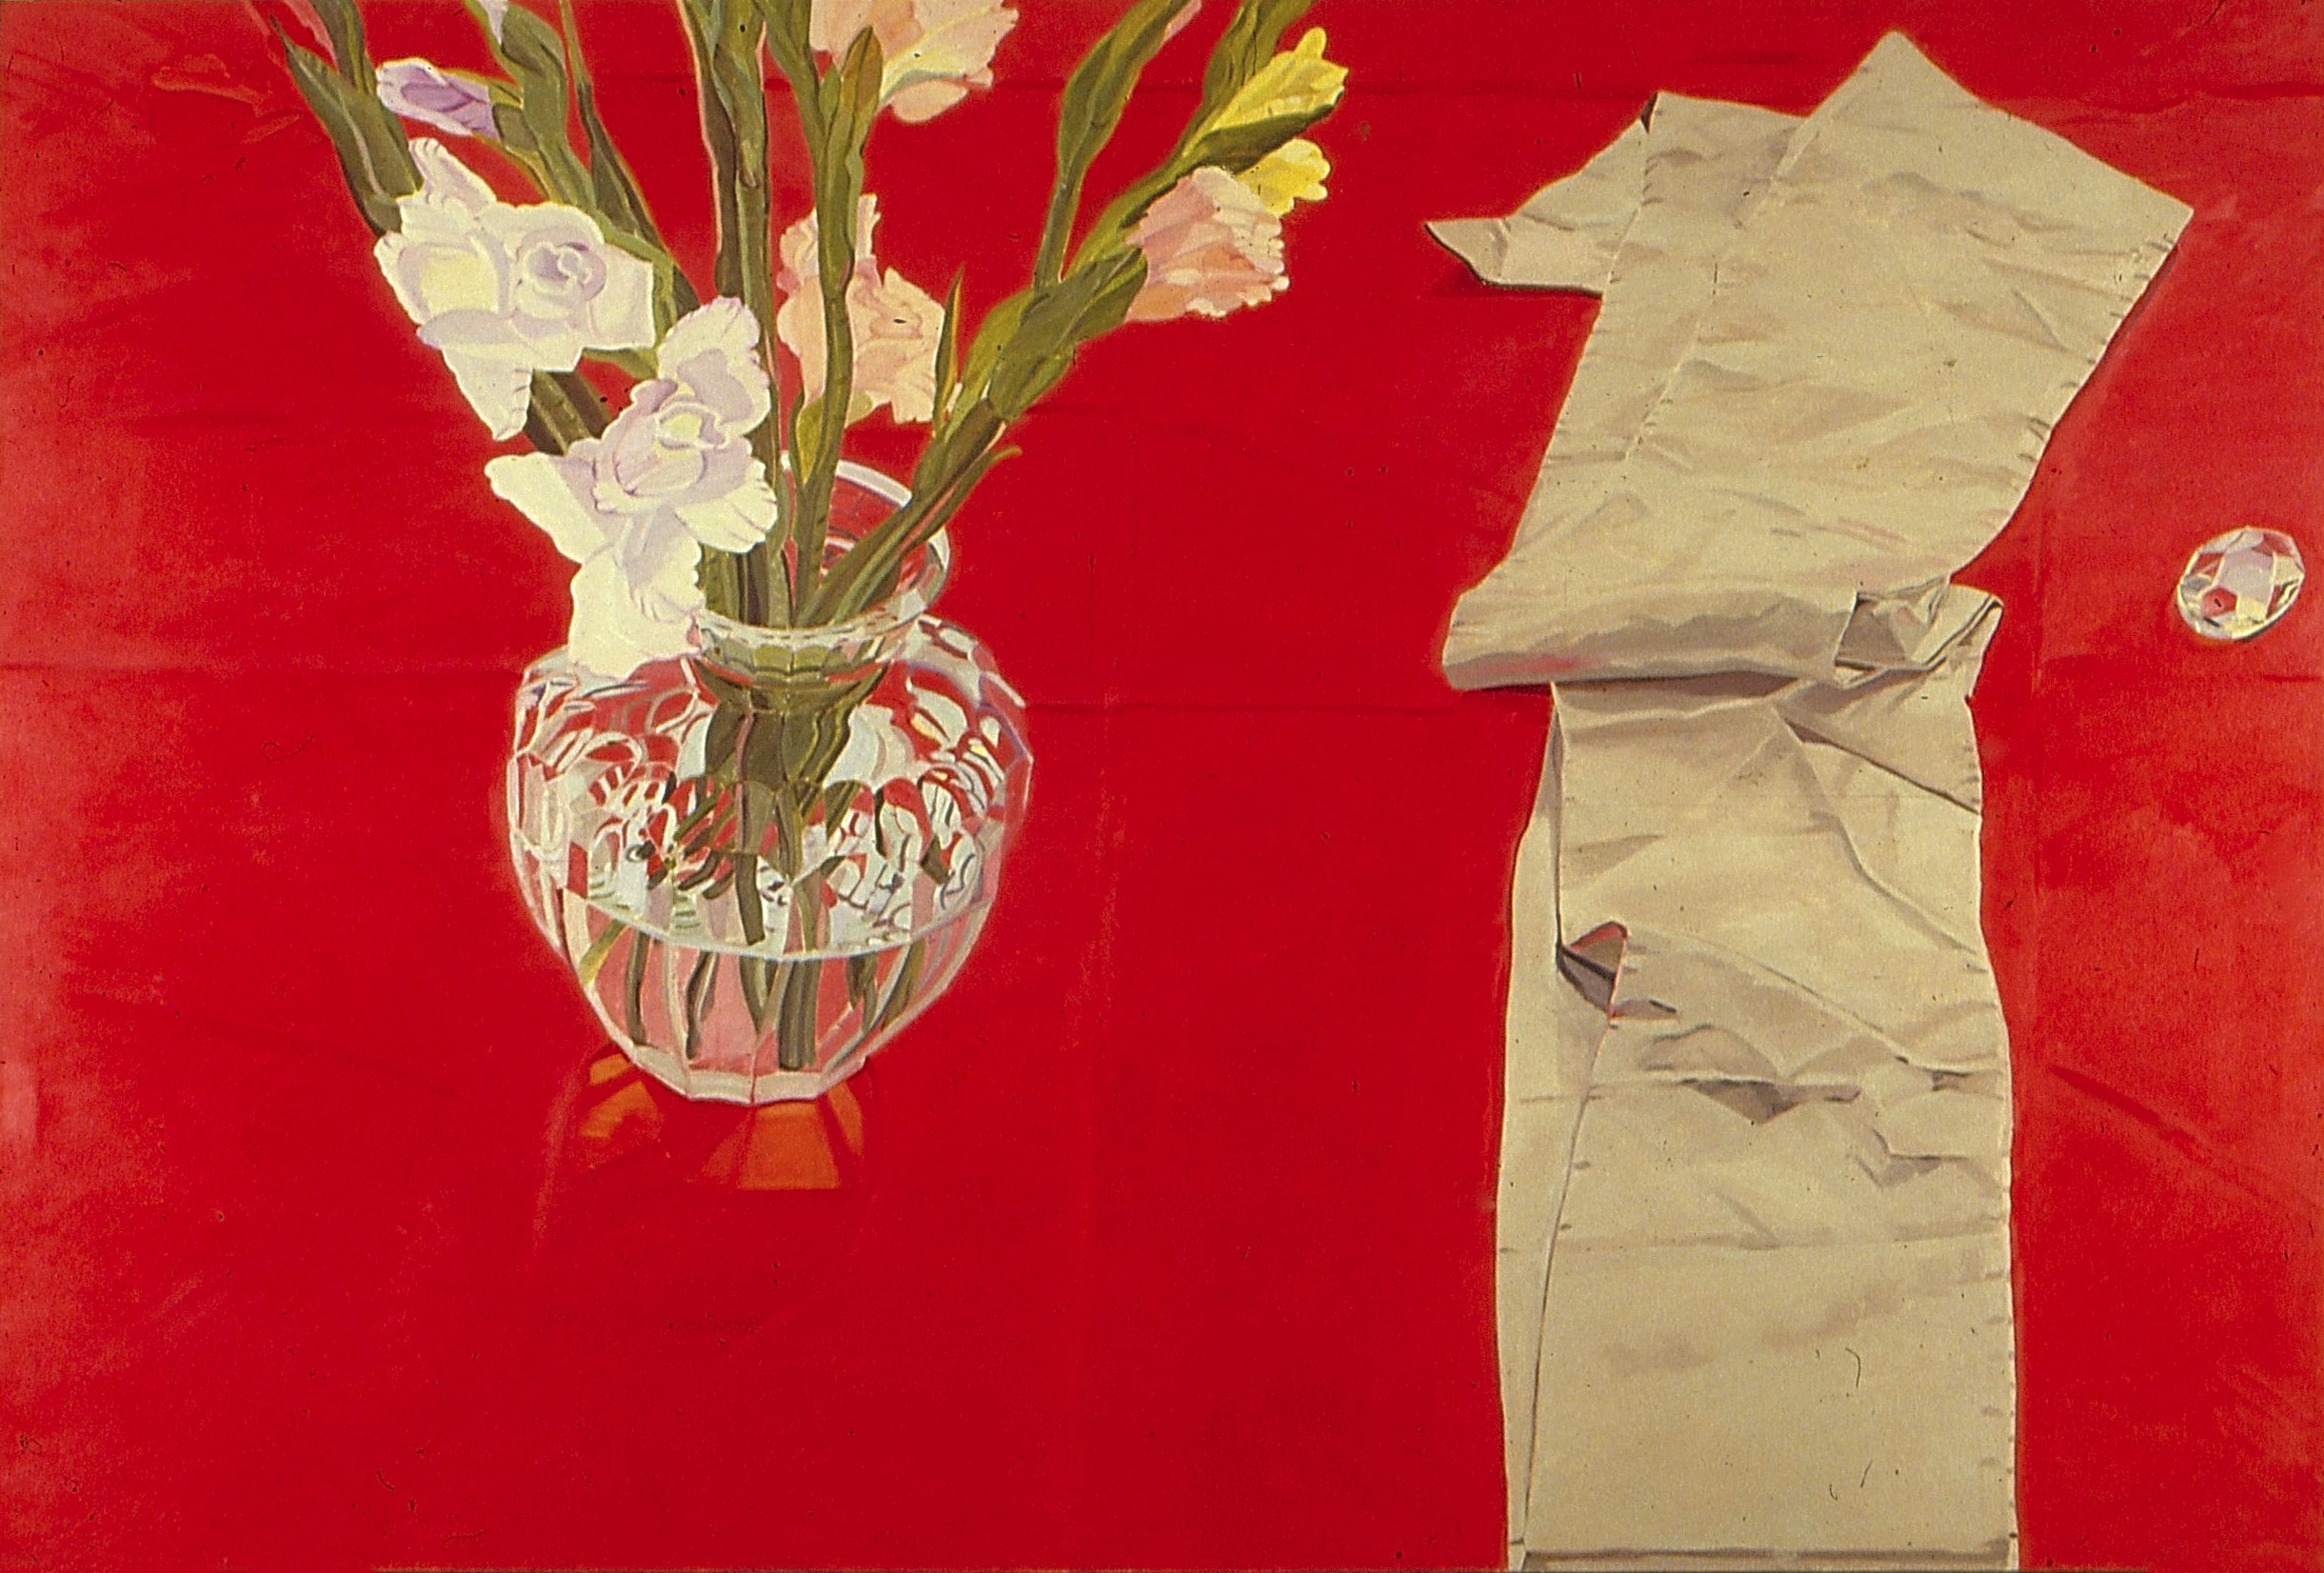   Big Red  oil on canvas 60 x 90” 1978 